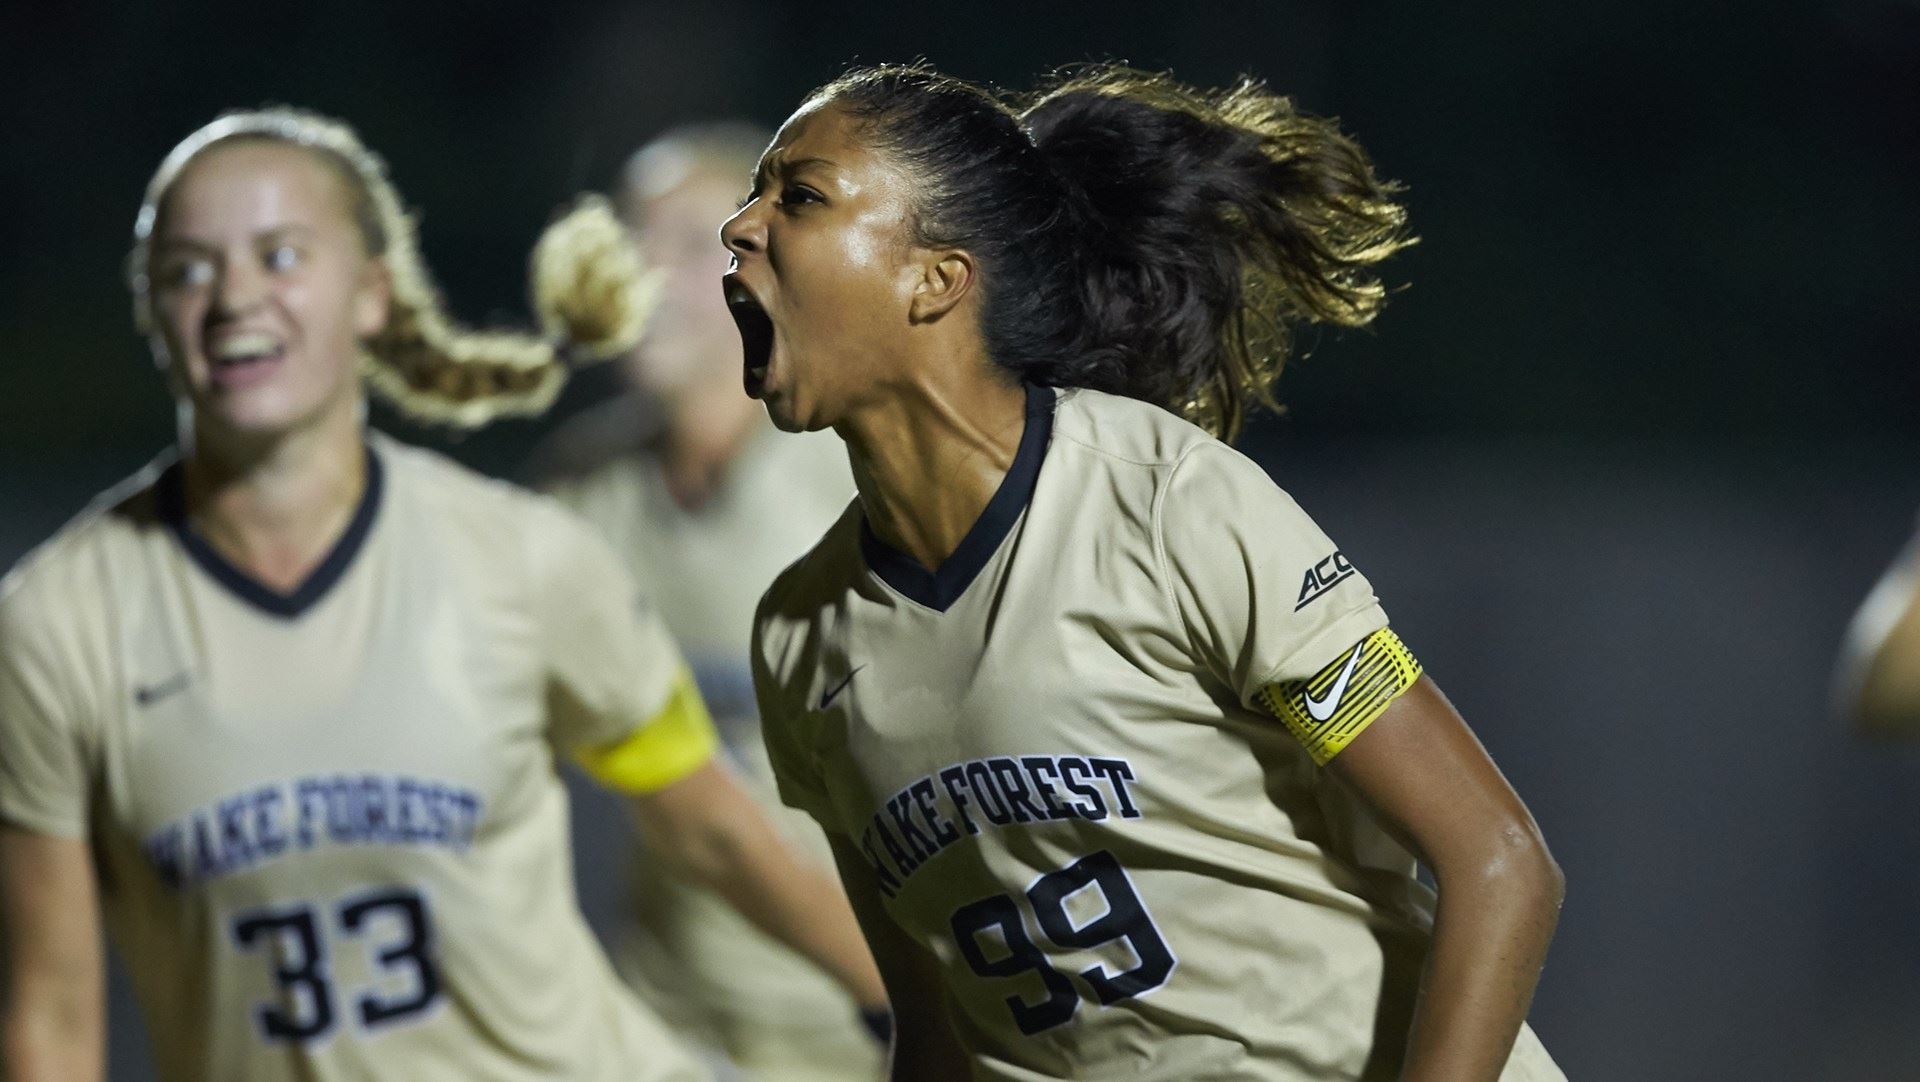 Madison Hammond’s (Navajo) penalty kick in the 87th minute helps Wake Forest battle top-ranked Virginia to a 1-1 draw to open ACC play